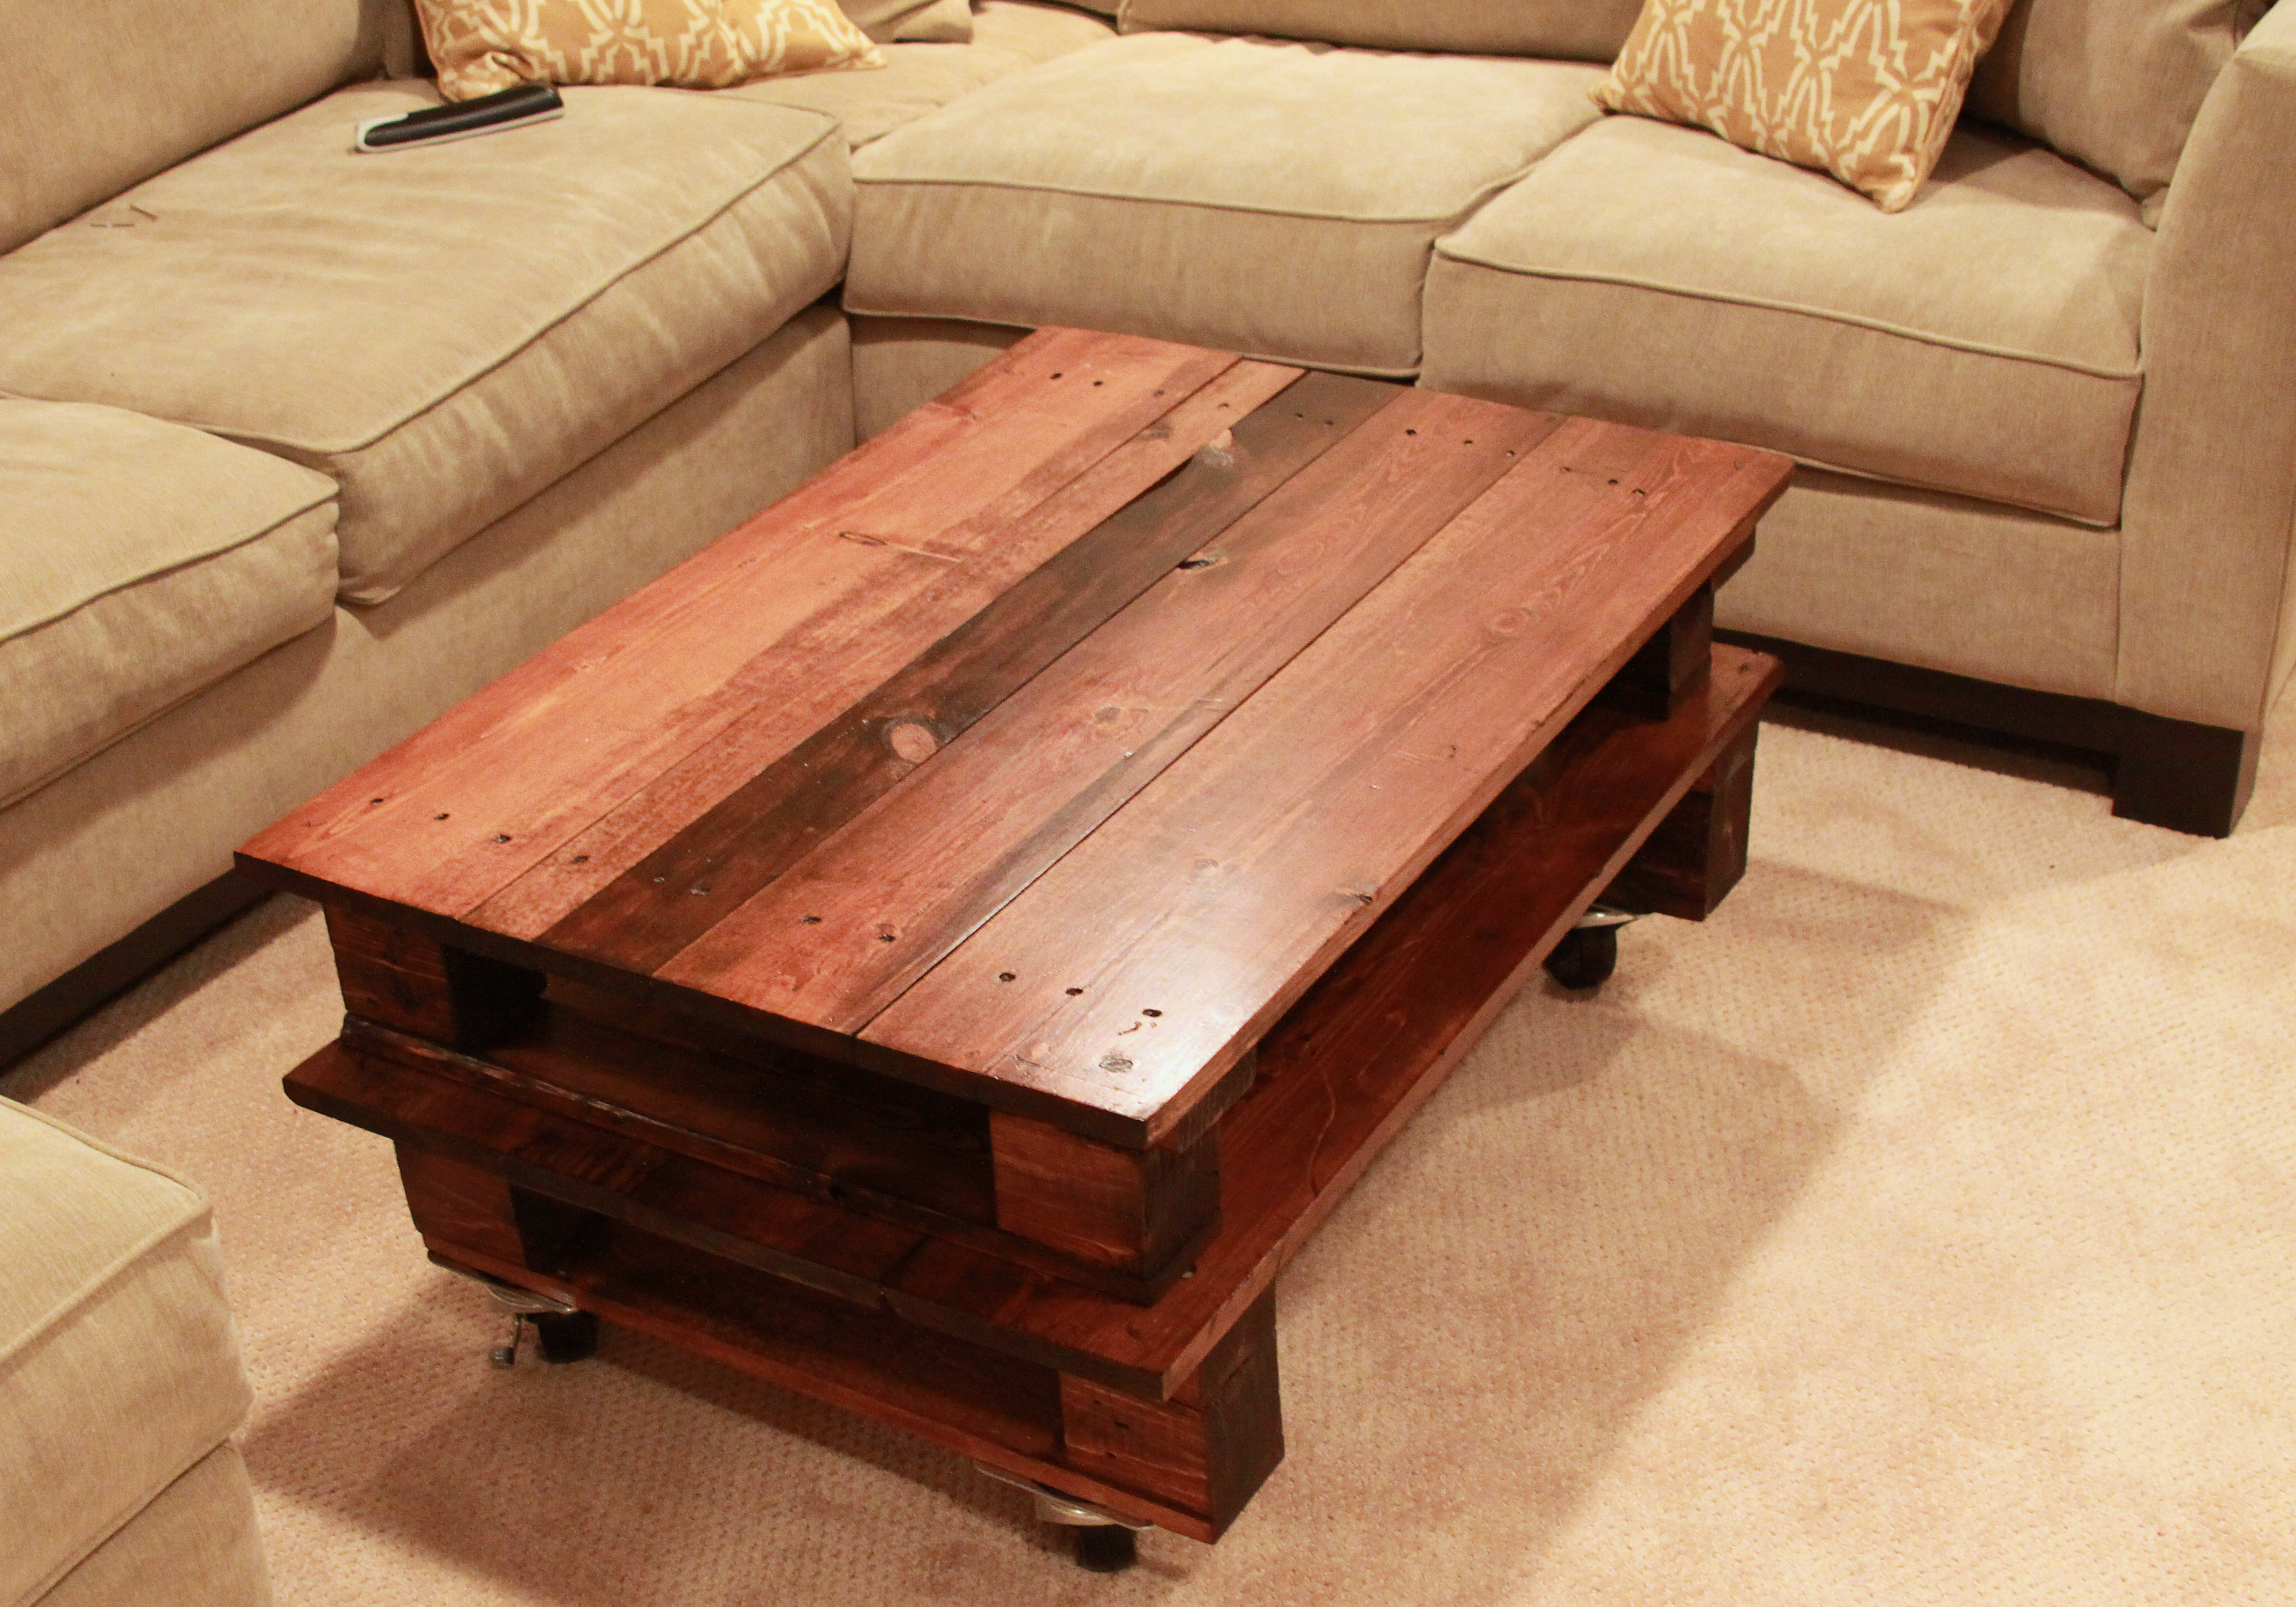 diy kitchen table from pallets